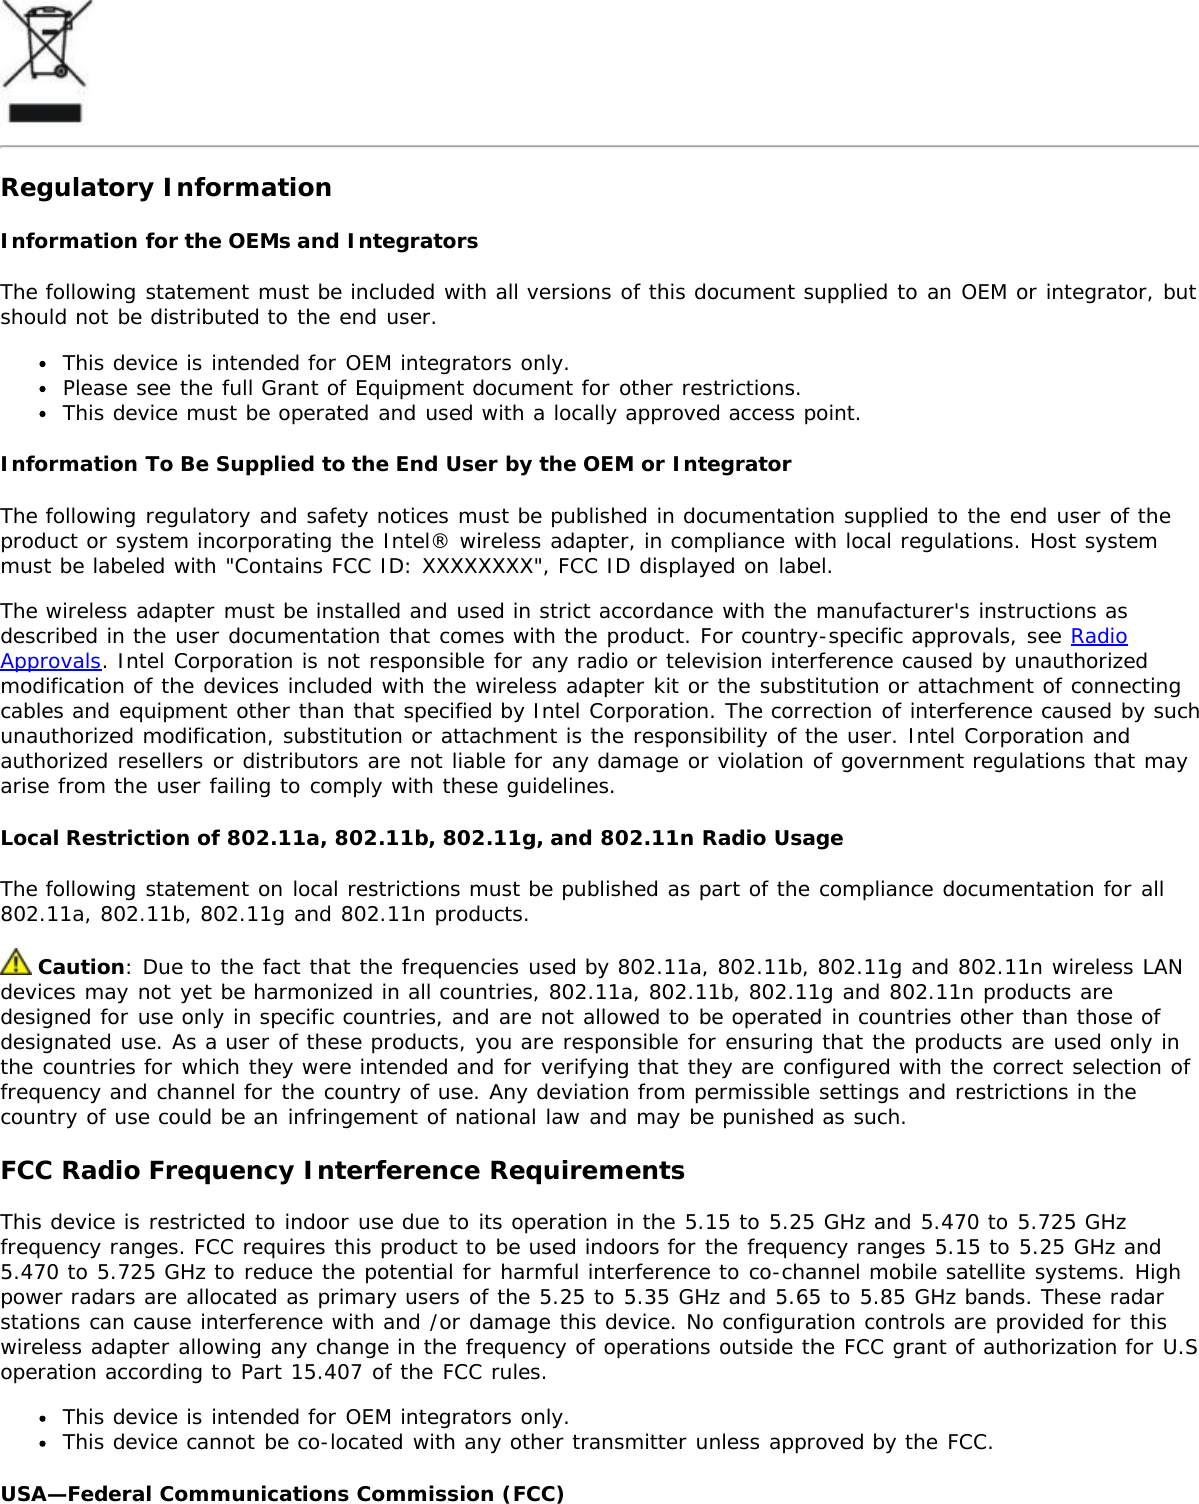 Regulatory InformationInformation for the OEMs and IntegratorsThe following statement must be included with all versions of this document supplied to an OEM or integrator, butshould not be distributed to the end user.This device is intended for OEM integrators only.Please see the full Grant of Equipment document for other restrictions.This device must be operated and used with a locally approved access point.Information To Be Supplied to the End User by the OEM or IntegratorThe following regulatory and safety notices must be published in documentation supplied to the end user of theproduct or system incorporating the Intel® wireless adapter, in compliance with local regulations. Host systemmust be labeled with &quot;Contains FCC ID: XXXXXXXX&quot;, FCC ID displayed on label.The wireless adapter must be installed and used in strict accordance with the manufacturer&apos;s instructions asdescribed in the user documentation that comes with the product. For country-specific approvals, see RadioApprovals. Intel Corporation is not responsible for any radio or television interference caused by unauthorizedmodification of the devices included with the wireless adapter kit or the substitution or attachment of connectingcables and equipment other than that specified by Intel Corporation. The correction of interference caused by suchunauthorized modification, substitution or attachment is the responsibility of the user. Intel Corporation andauthorized resellers or distributors are not liable for any damage or violation of government regulations that mayarise from the user failing to comply with these guidelines.Local Restriction of 802.11a, 802.11b, 802.11g, and 802.11n Radio UsageThe following statement on local restrictions must be published as part of the compliance documentation for all802.11a, 802.11b, 802.11g and 802.11n products. Caution: Due to the fact that the frequencies used by 802.11a, 802.11b, 802.11g and 802.11n wireless LANdevices may not yet be harmonized in all countries, 802.11a, 802.11b, 802.11g and 802.11n products aredesigned for use only in specific countries, and are not allowed to be operated in countries other than those ofdesignated use. As a user of these products, you are responsible for ensuring that the products are used only inthe countries for which they were intended and for verifying that they are configured with the correct selection offrequency and channel for the country of use. Any deviation from permissible settings and restrictions in thecountry of use could be an infringement of national law and may be punished as such.FCC Radio Frequency Interference RequirementsThis device is restricted to indoor use due to its operation in the 5.15 to 5.25 GHz and 5.470 to 5.725 GHzfrequency ranges. FCC requires this product to be used indoors for the frequency ranges 5.15 to 5.25 GHz and5.470 to 5.725 GHz to reduce the potential for harmful interference to co-channel mobile satellite systems. Highpower radars are allocated as primary users of the 5.25 to 5.35 GHz and 5.65 to 5.85 GHz bands. These radarstations can cause interference with and /or damage this device. No configuration controls are provided for thiswireless adapter allowing any change in the frequency of operations outside the FCC grant of authorization for U.Soperation according to Part 15.407 of the FCC rules.This device is intended for OEM integrators only.This device cannot be co-located with any other transmitter unless approved by the FCC.USA—Federal Communications Commission (FCC)